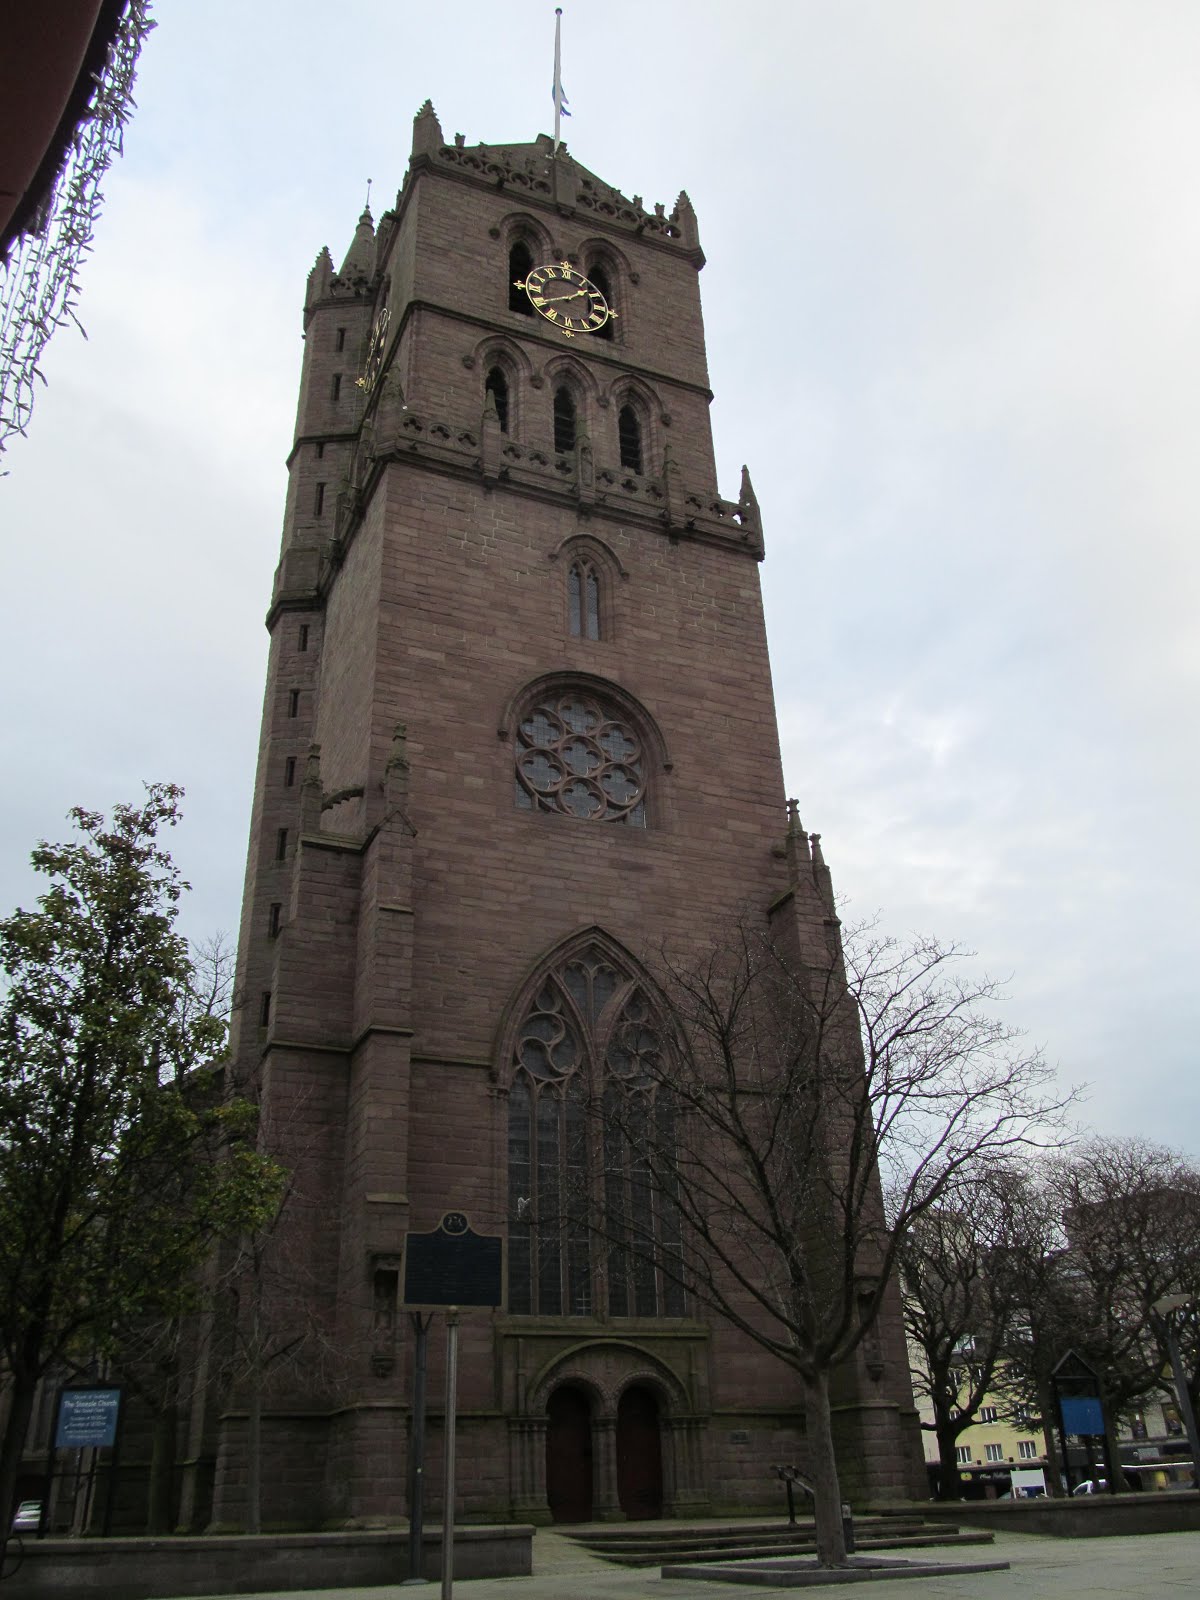 Dundee Photos - City of Discovery: The Old Steeple Dundee